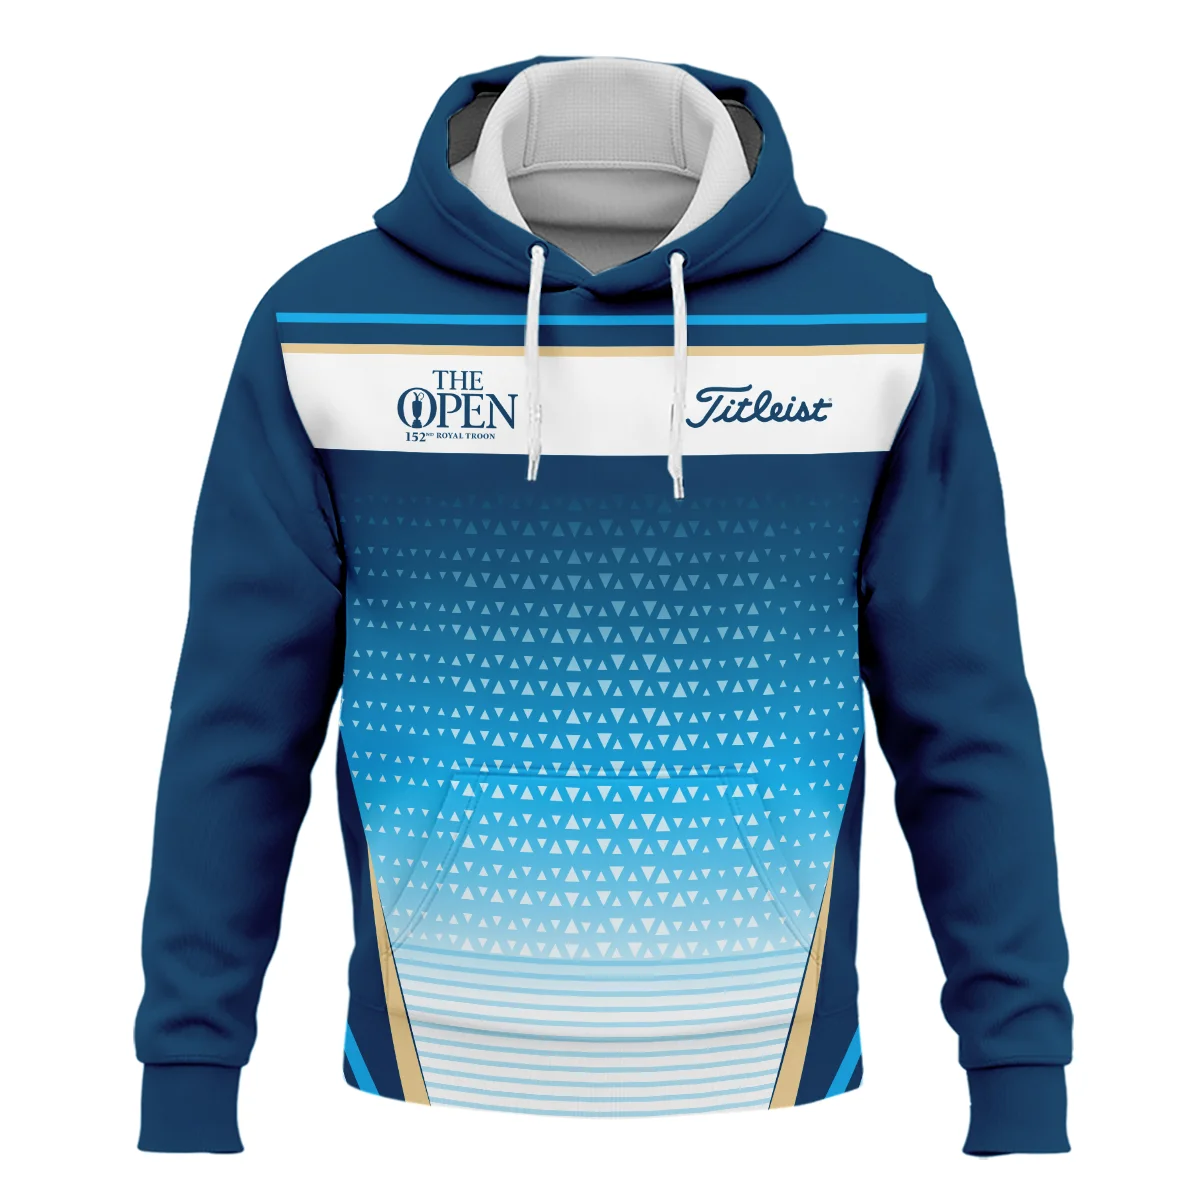 152nd The Open Championship Golf Blue Yellow White Pattern Background Titleist Zipper Hoodie Shirt All Over Prints HOTOP250624A01TLZHD